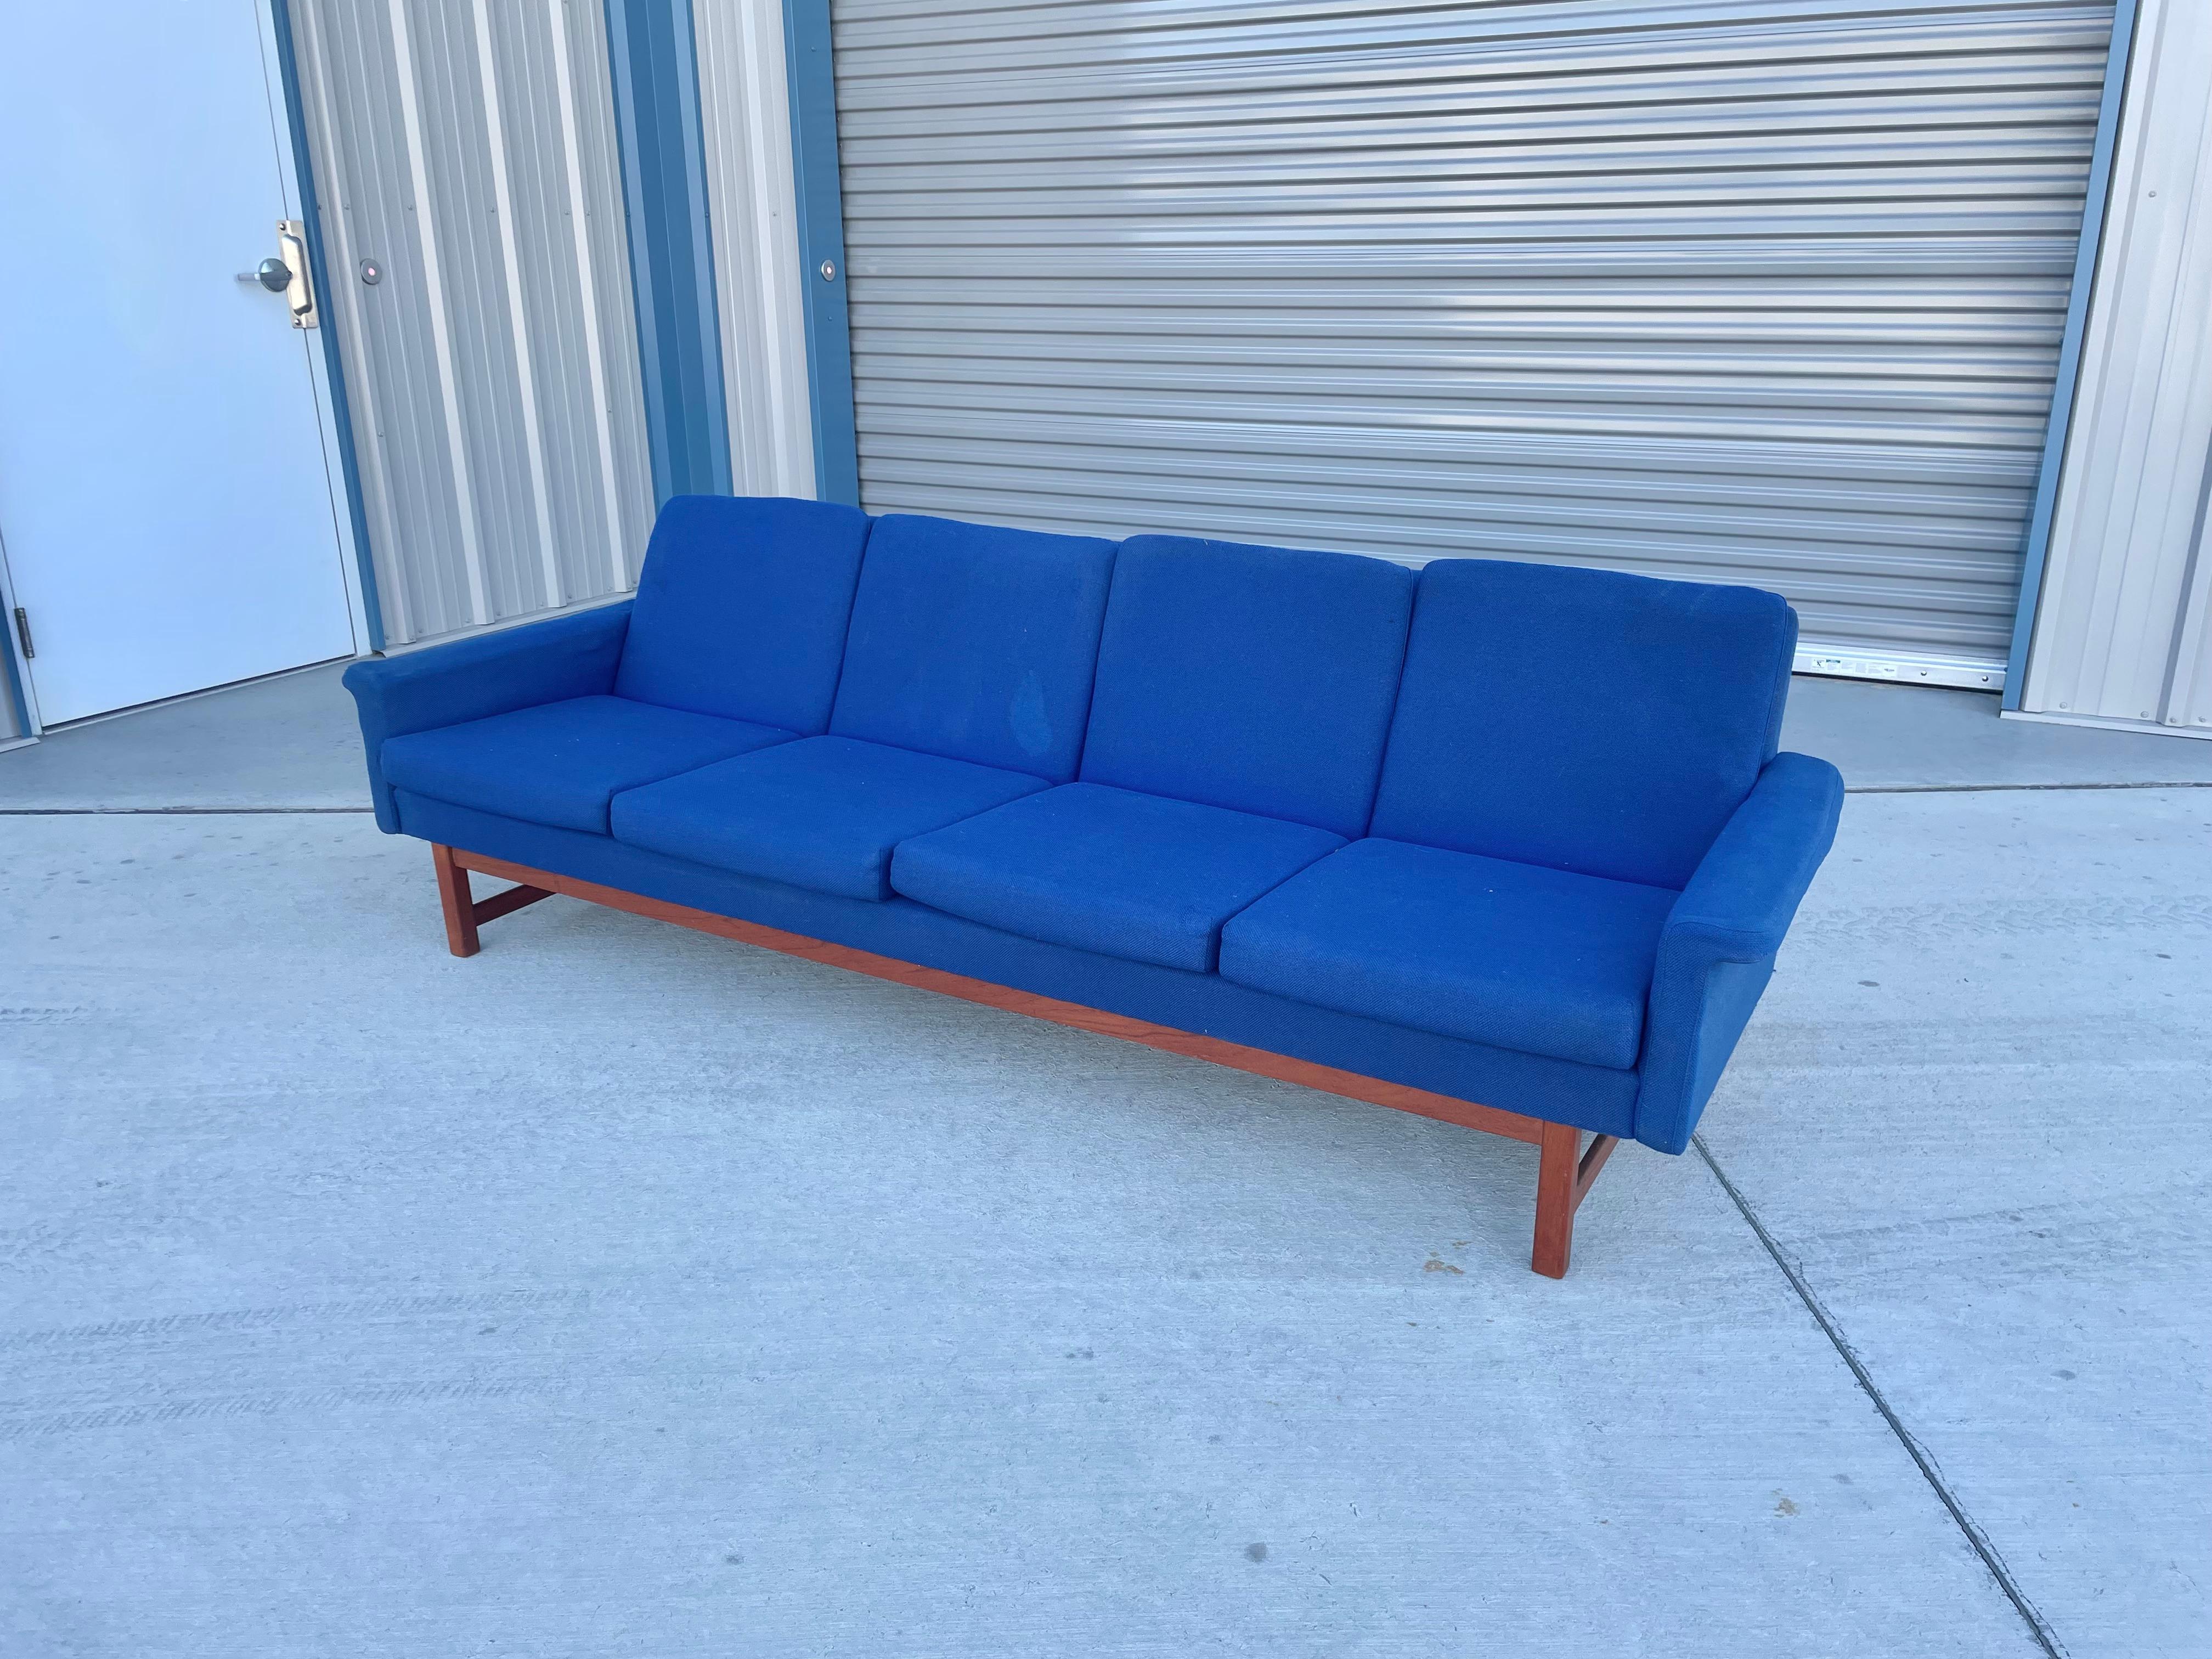 Danish Modern Teak Sofa In Good Condition For Sale In North Hollywood, CA